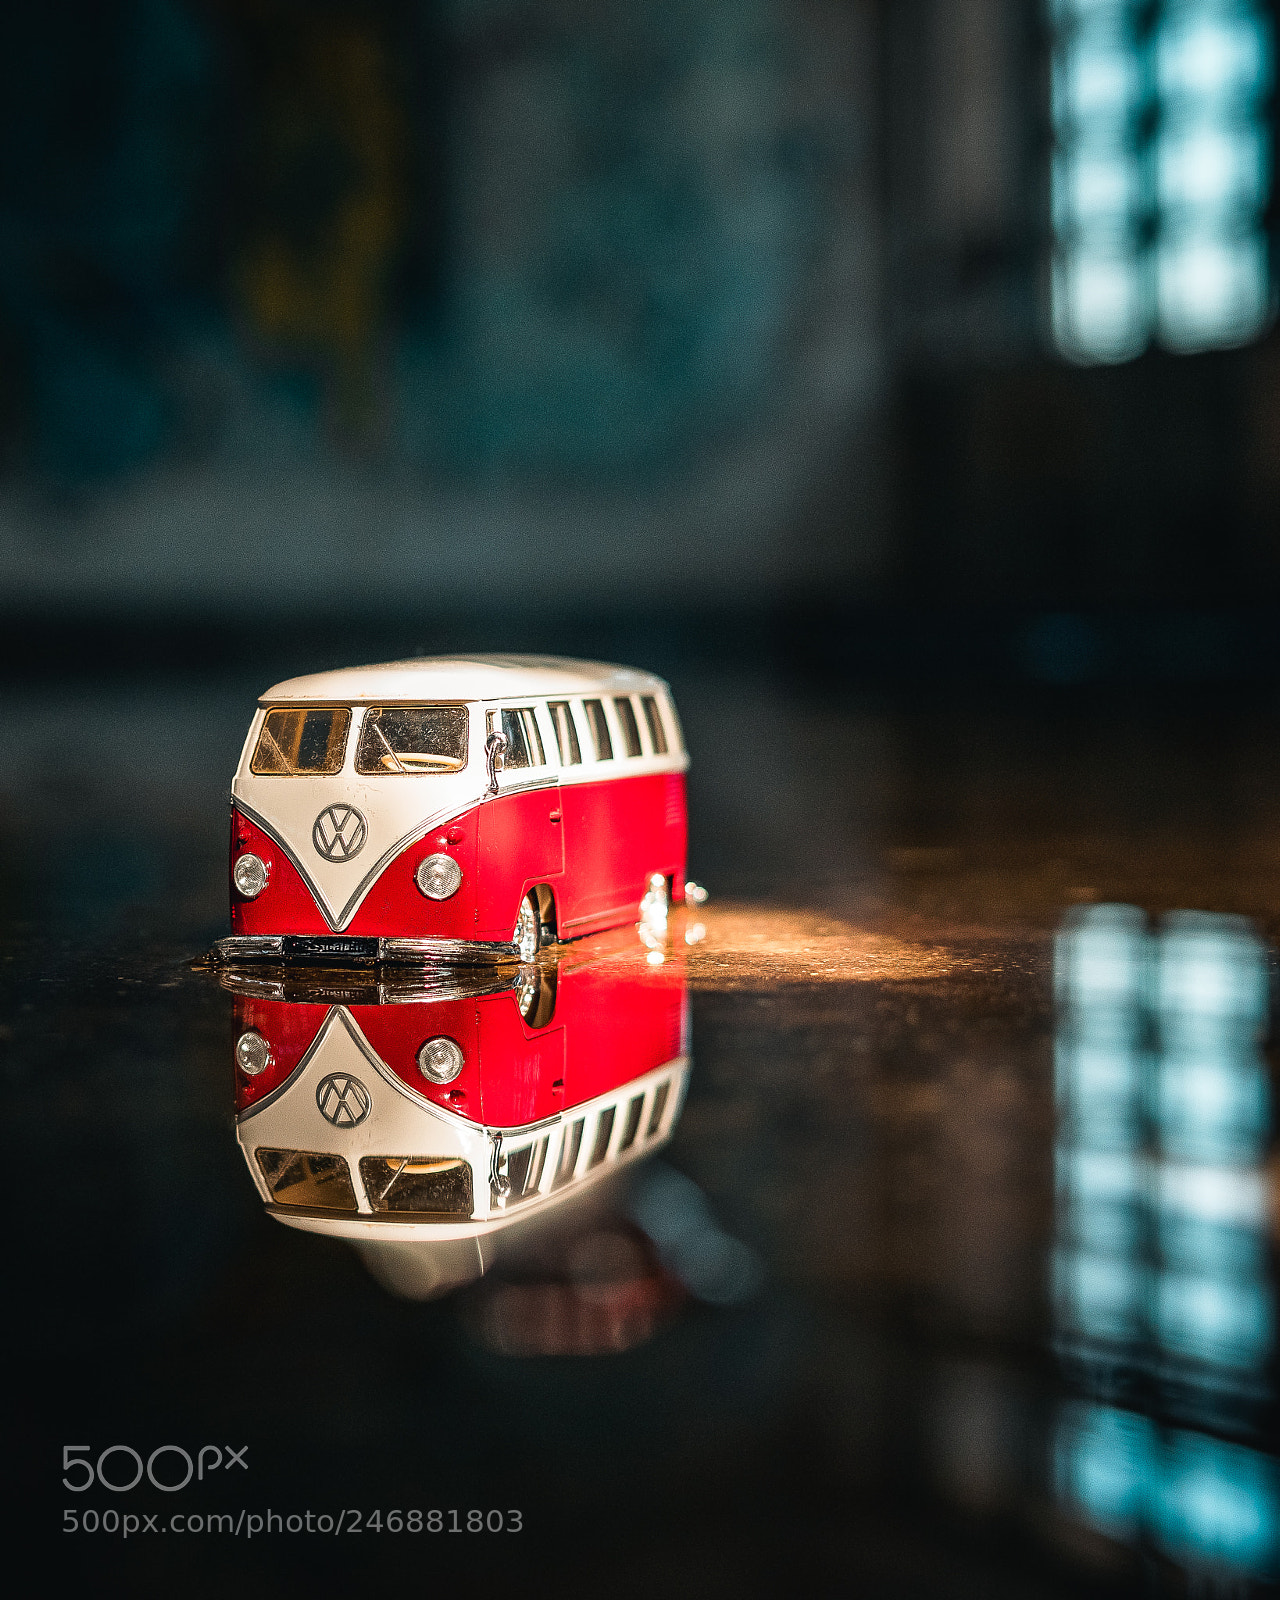 Sony a7 II sample photo. Vw toy in bando. photography